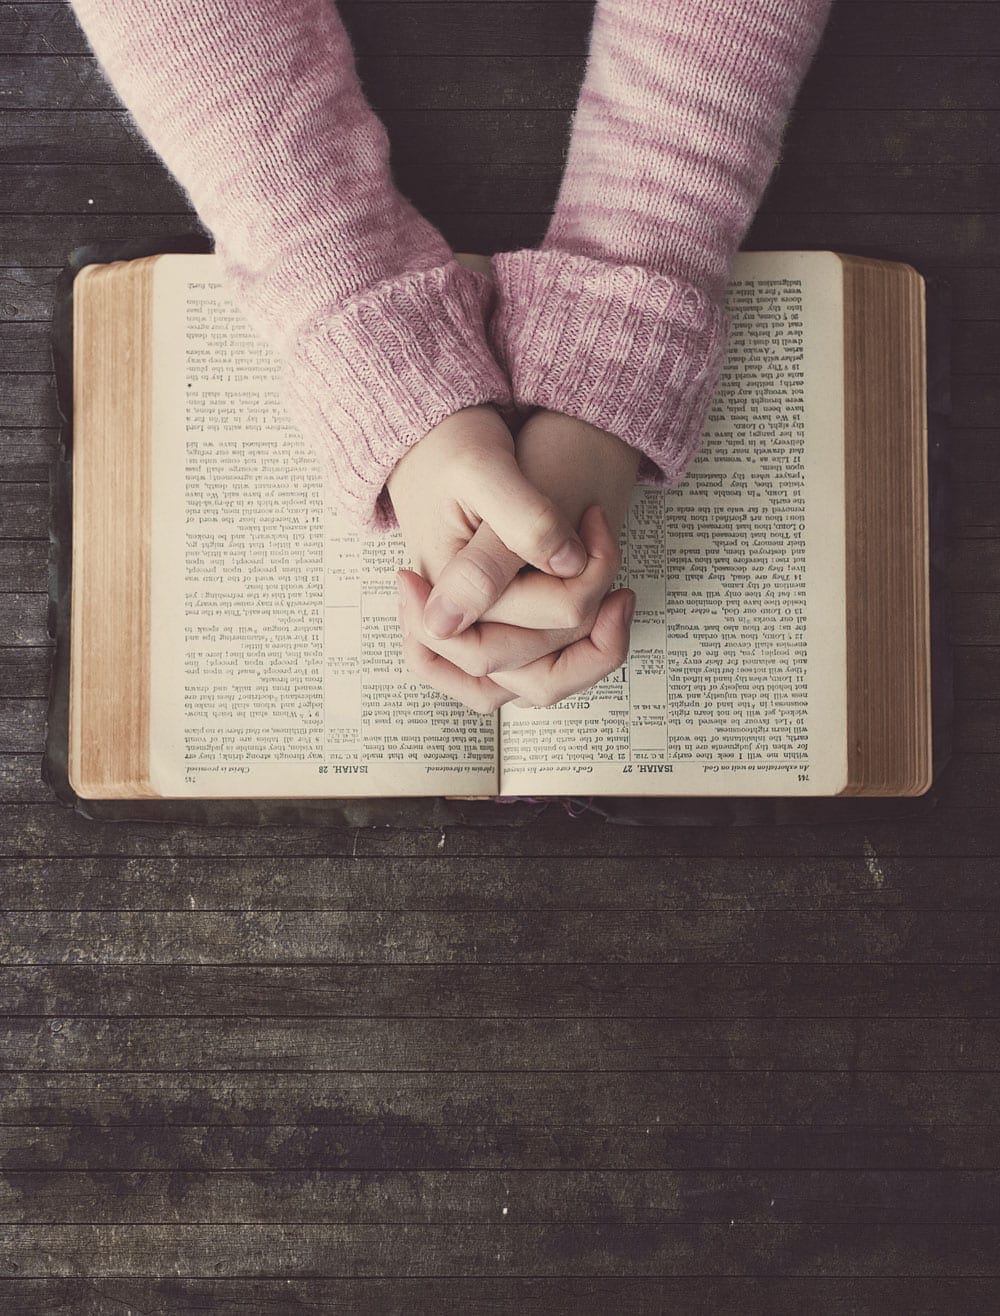 Hands clasped together over an open book on a wooden surface, illustrating "Who We Are".